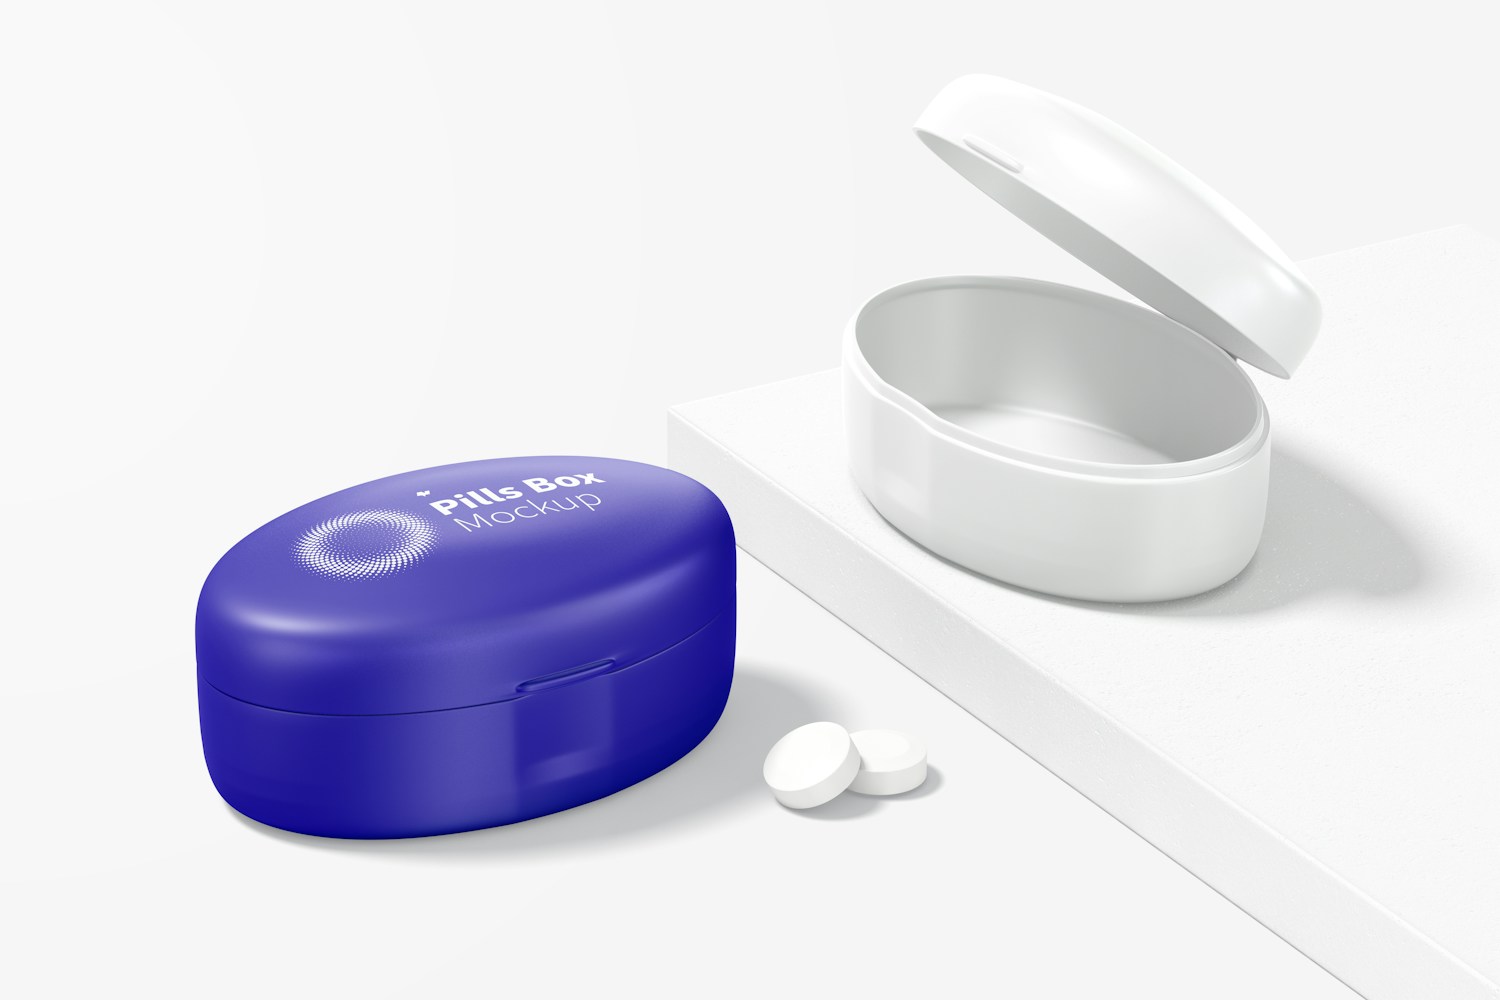 Oval Pills Boxes Mockup, Opened and Closed